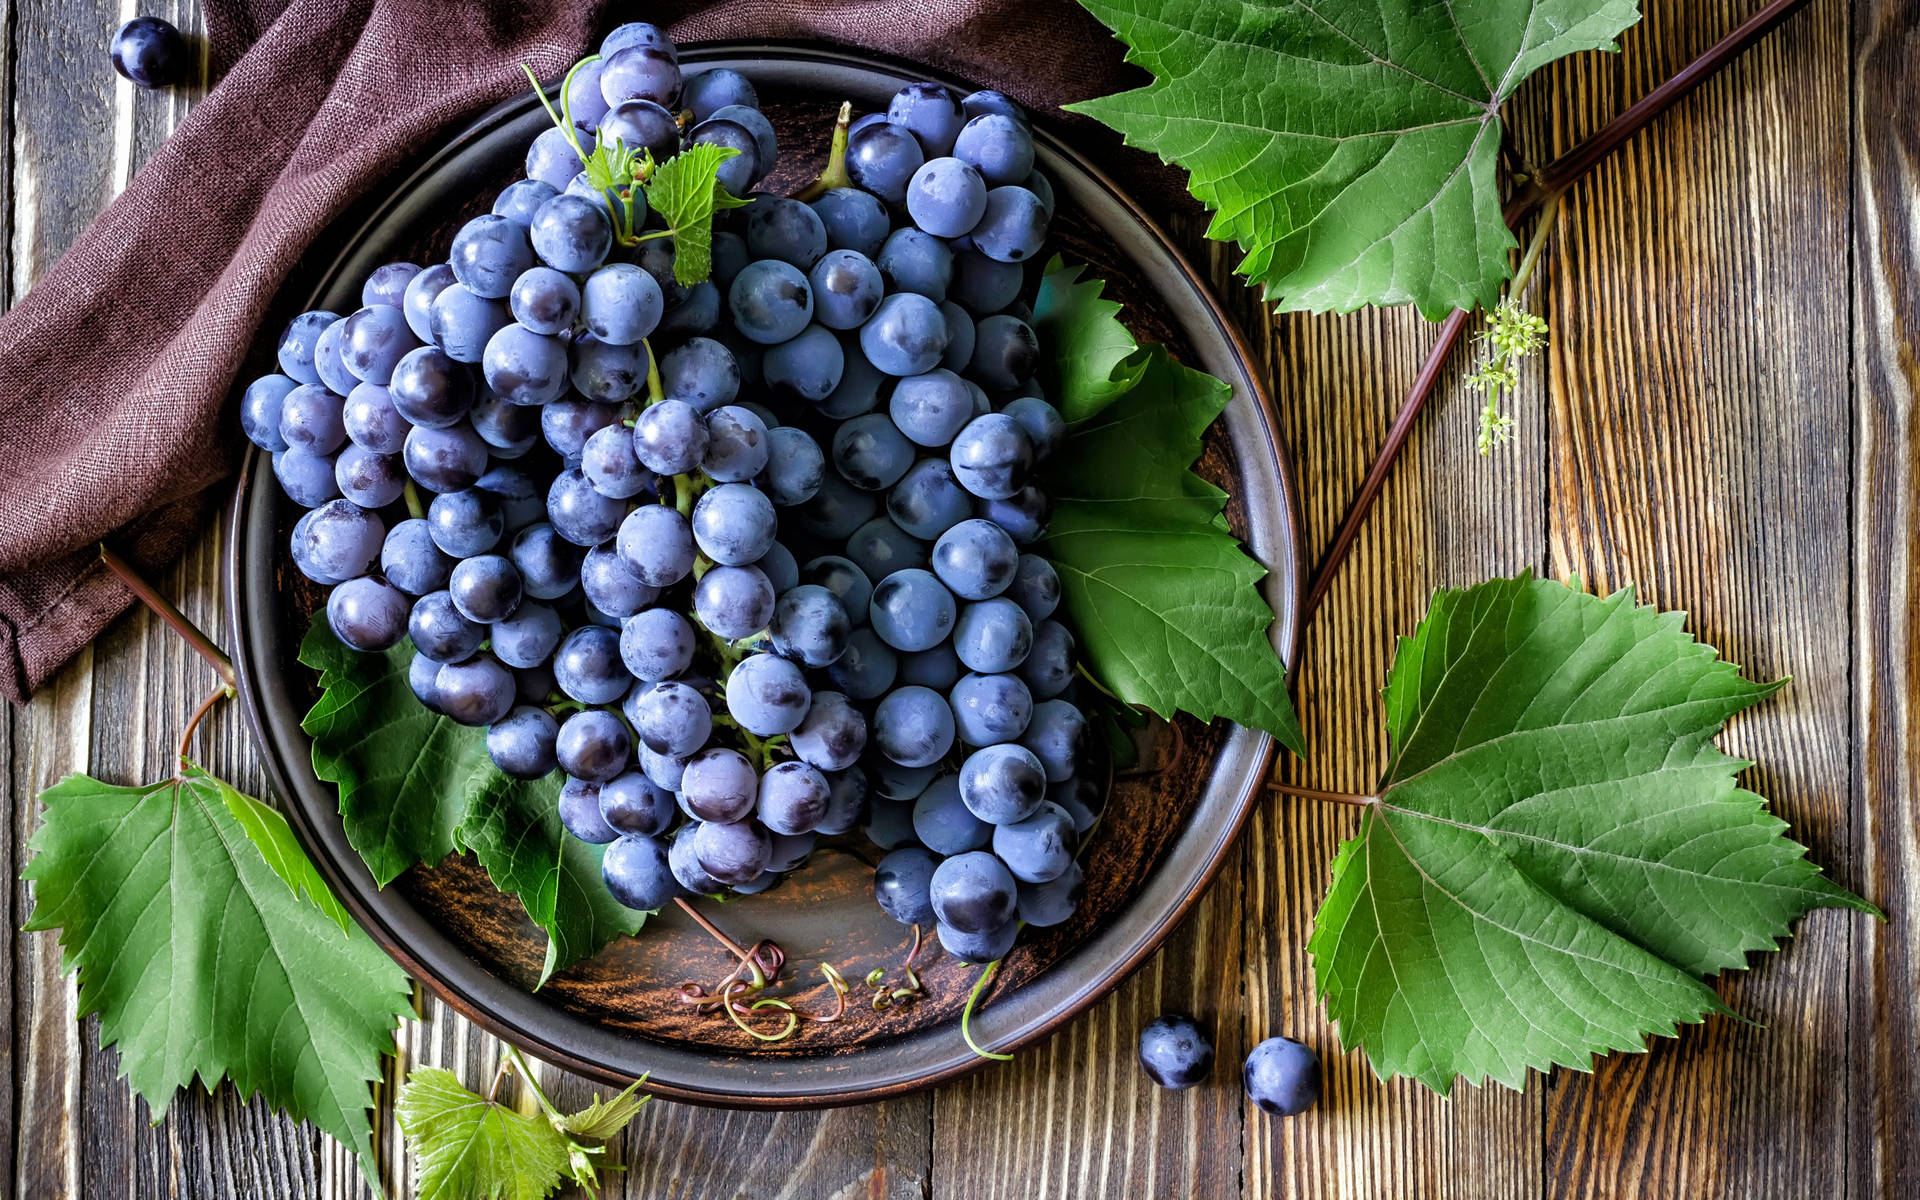 Discover more than 78 grapes wallpaper best